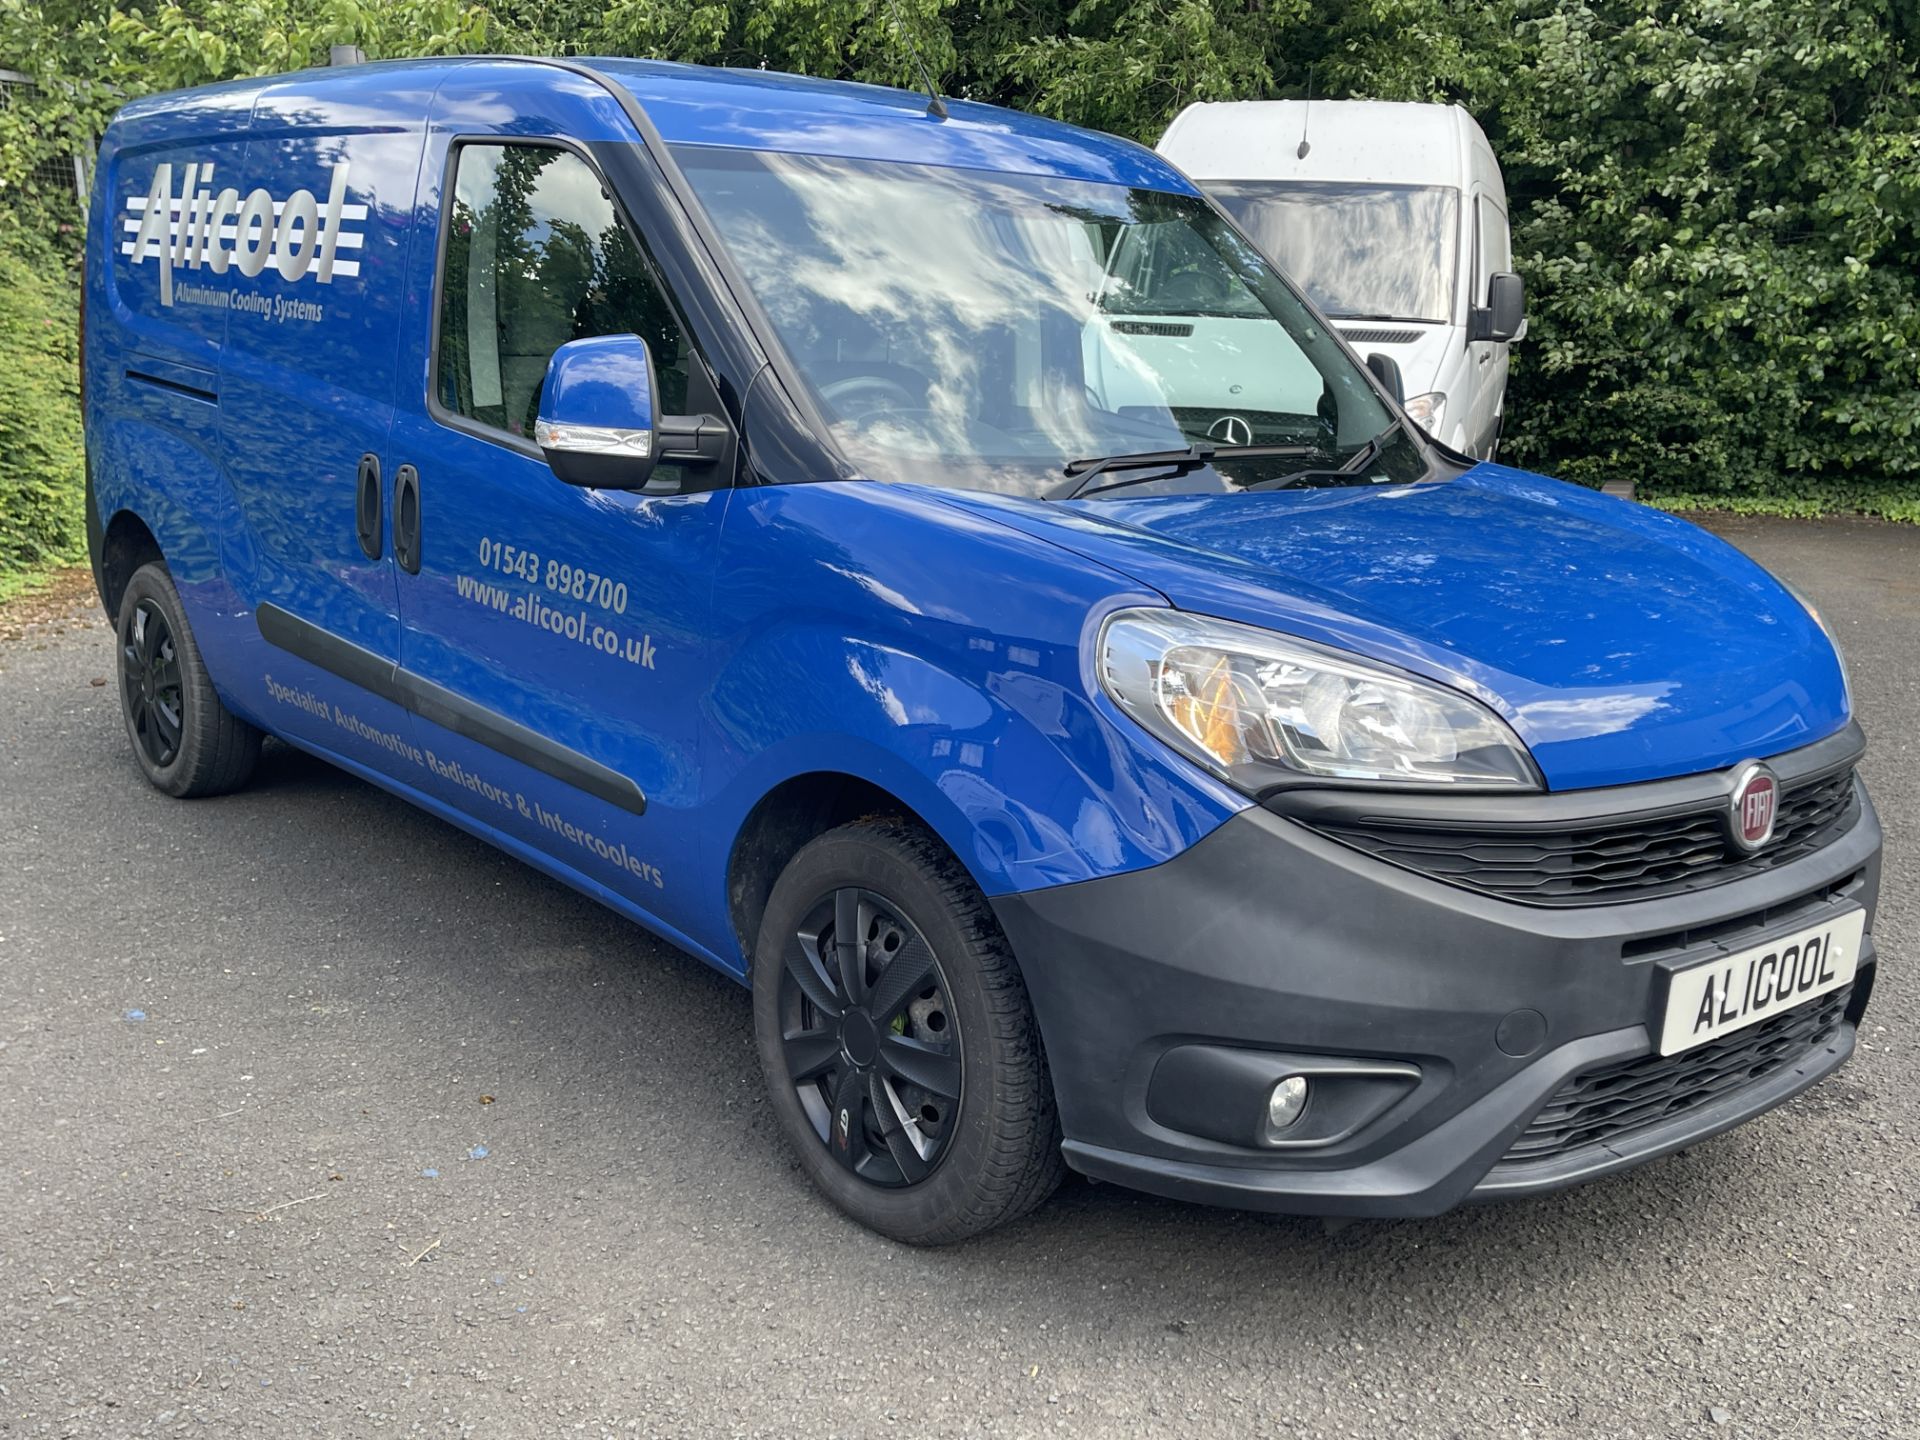 2016 - Fiat Doblo SX Mulijet 1,248cc Diesel Panel Van - High Level of Factory Options and Low Miles - Image 9 of 59